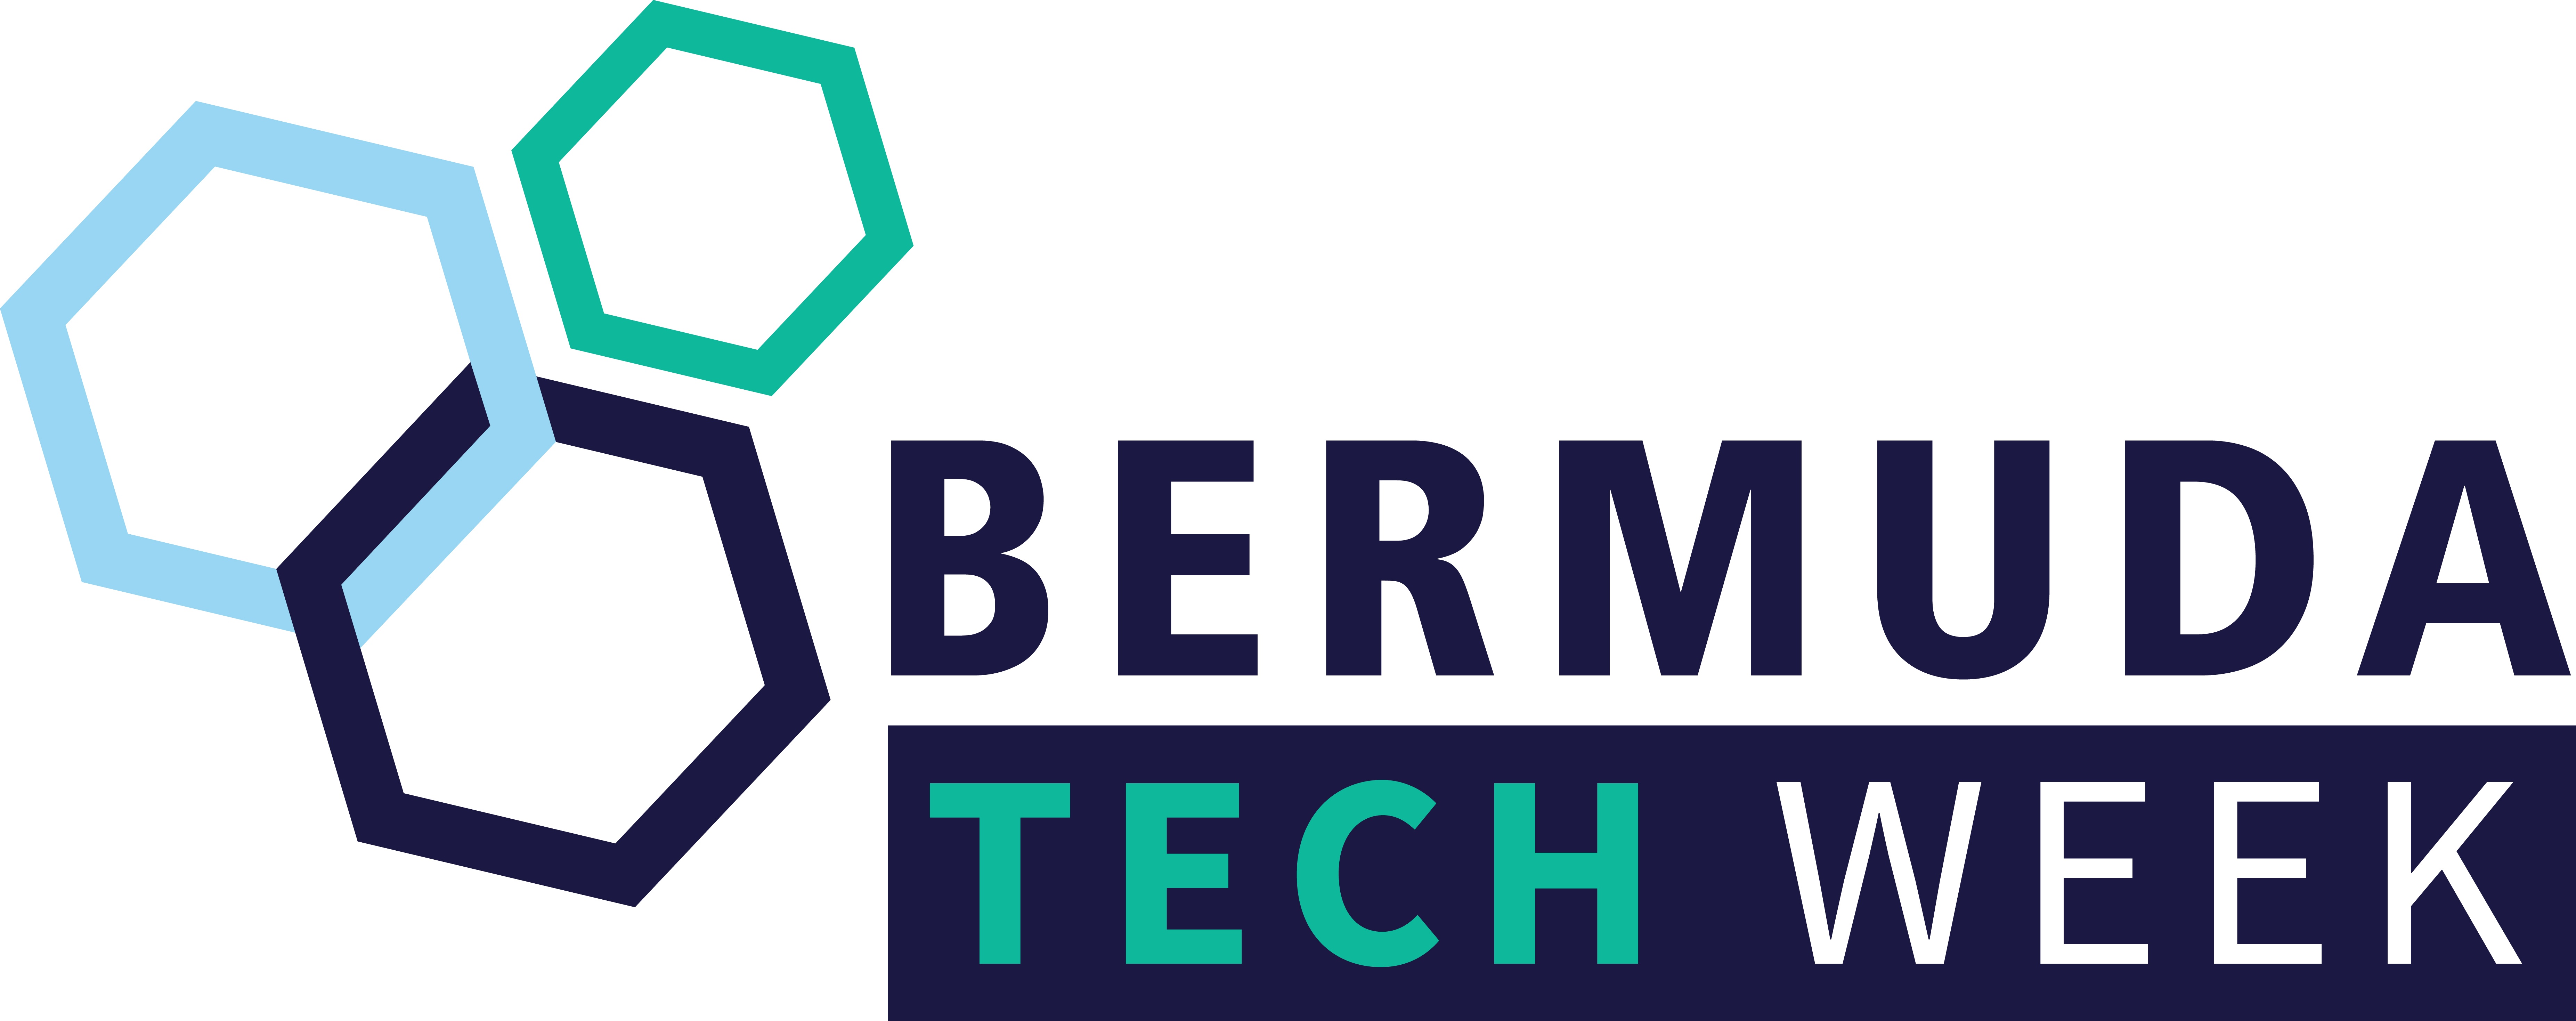 Bermuda Tech Week 2019 to celebrate innovation and explore opportunities for growth